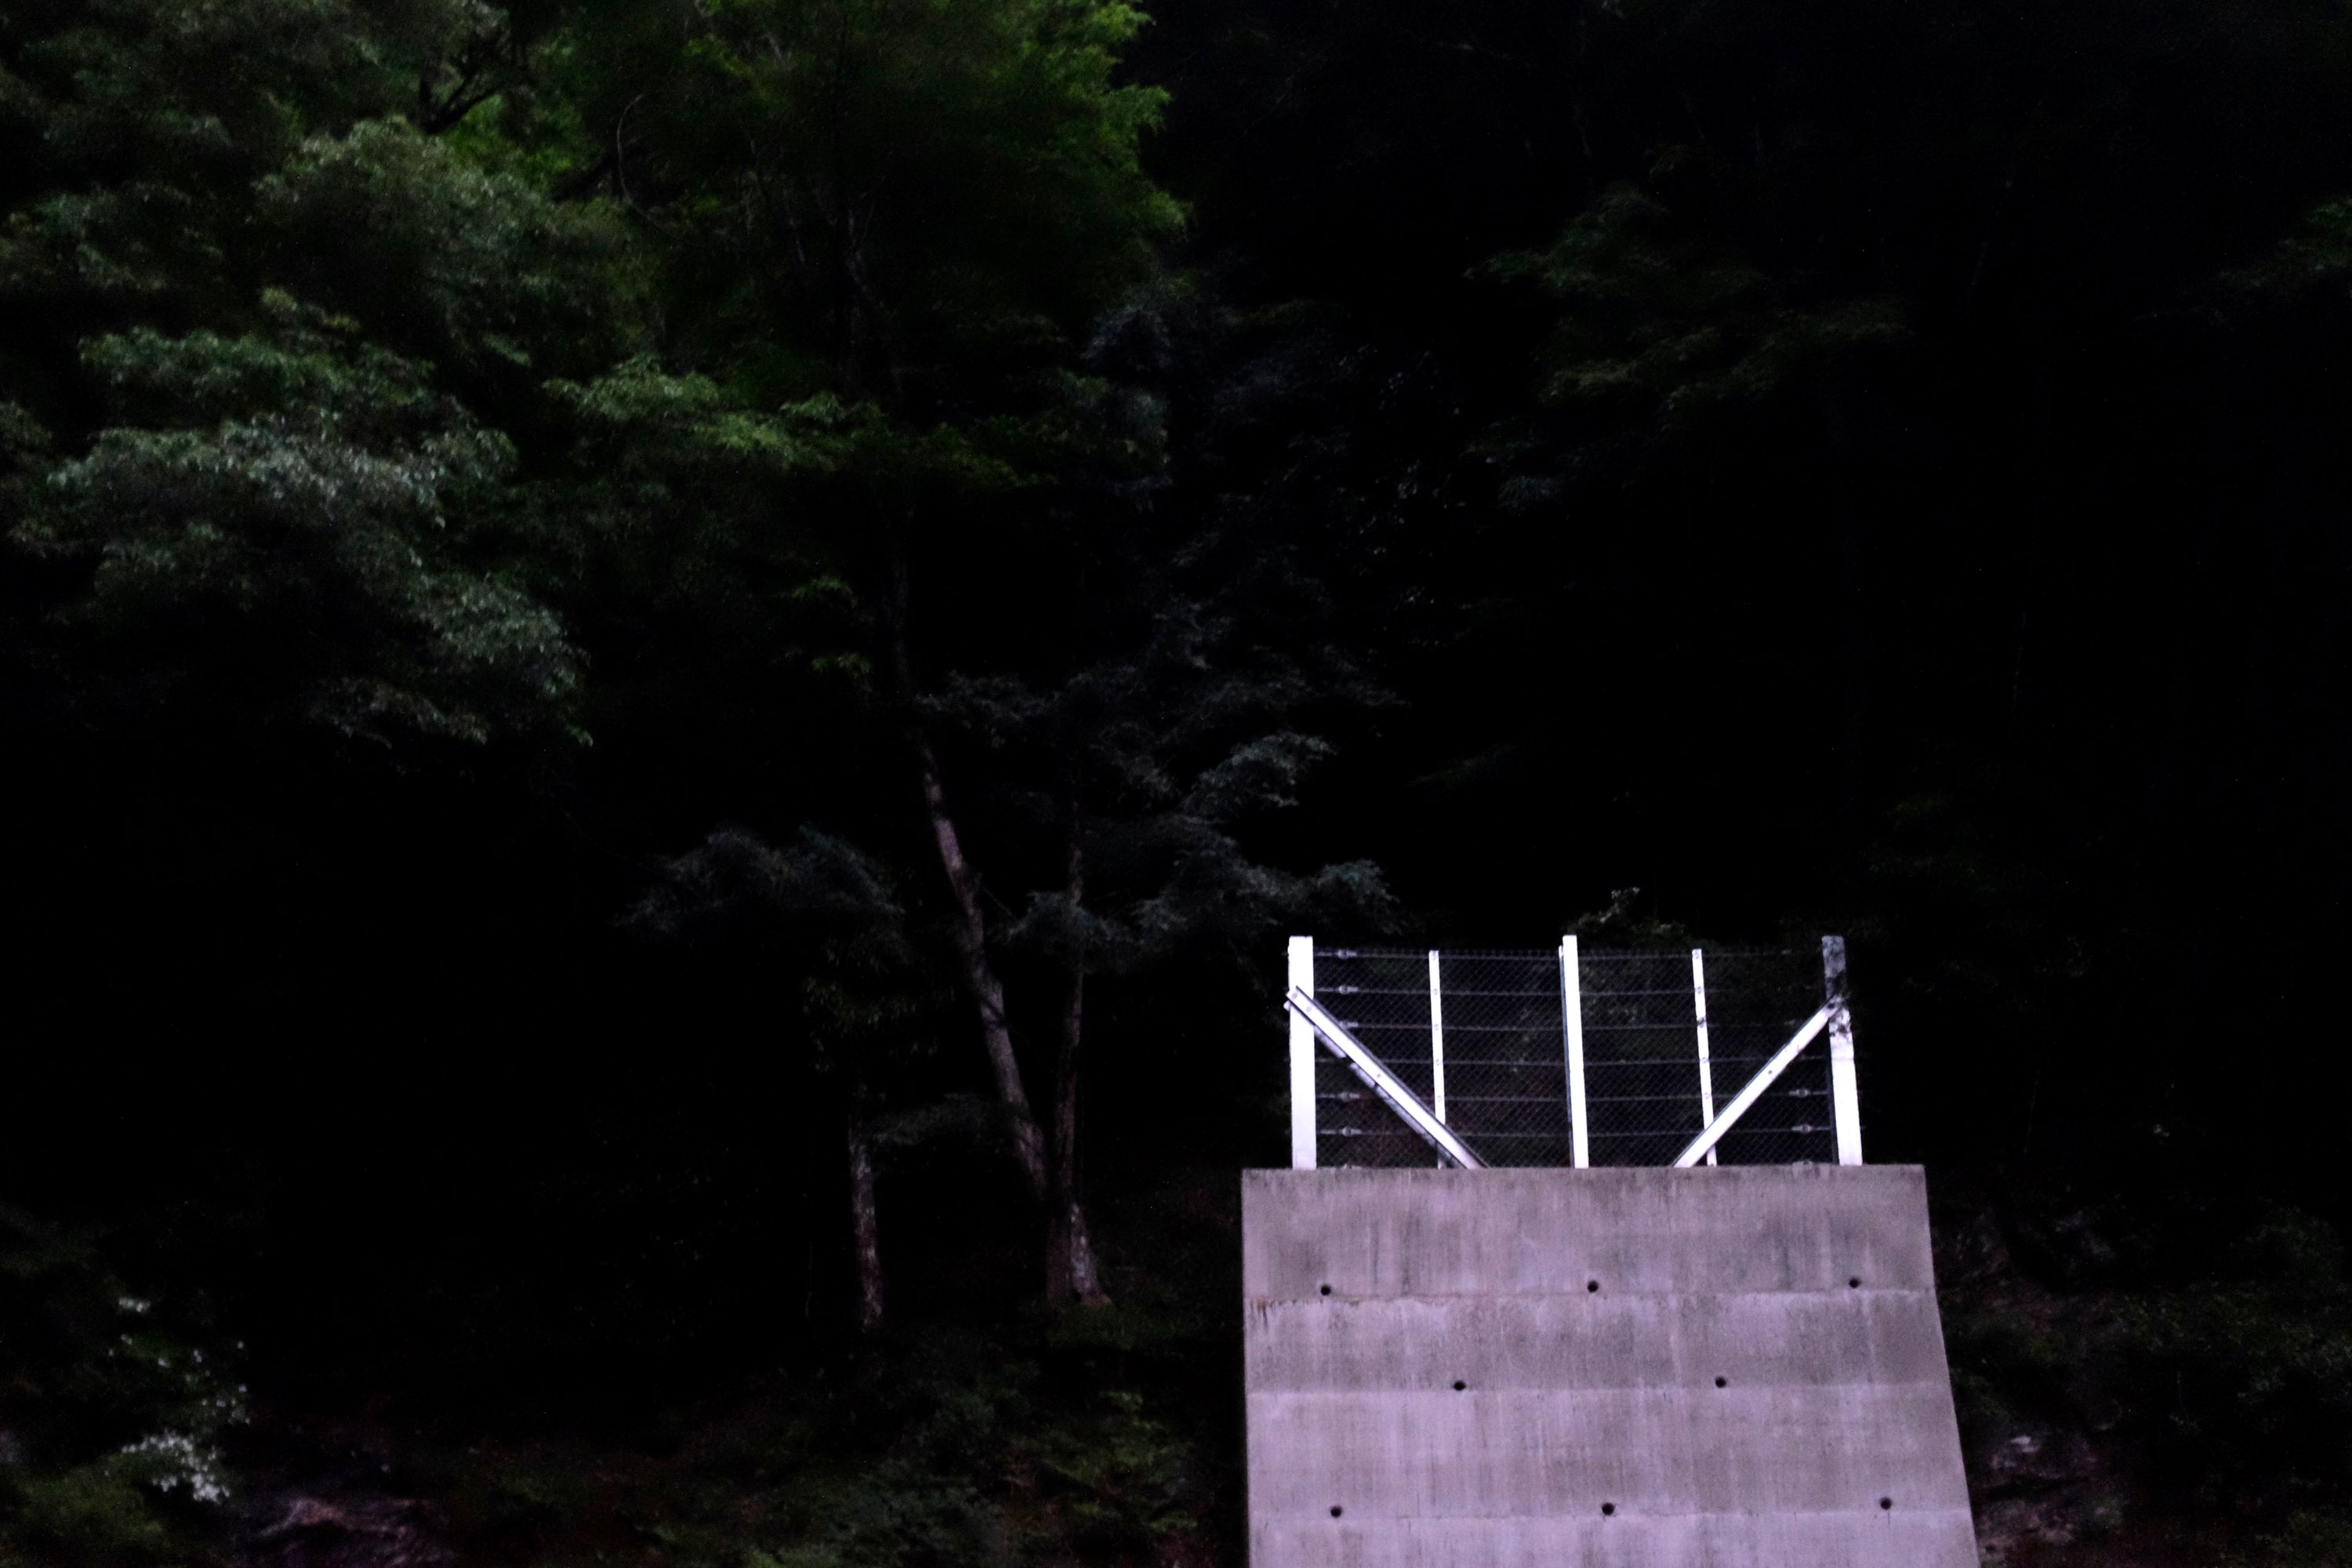 The flash suggests a forest at night and highlights a set of guardrails which spell NIИ, the same way as the logo of the band Nine Inch Nails.